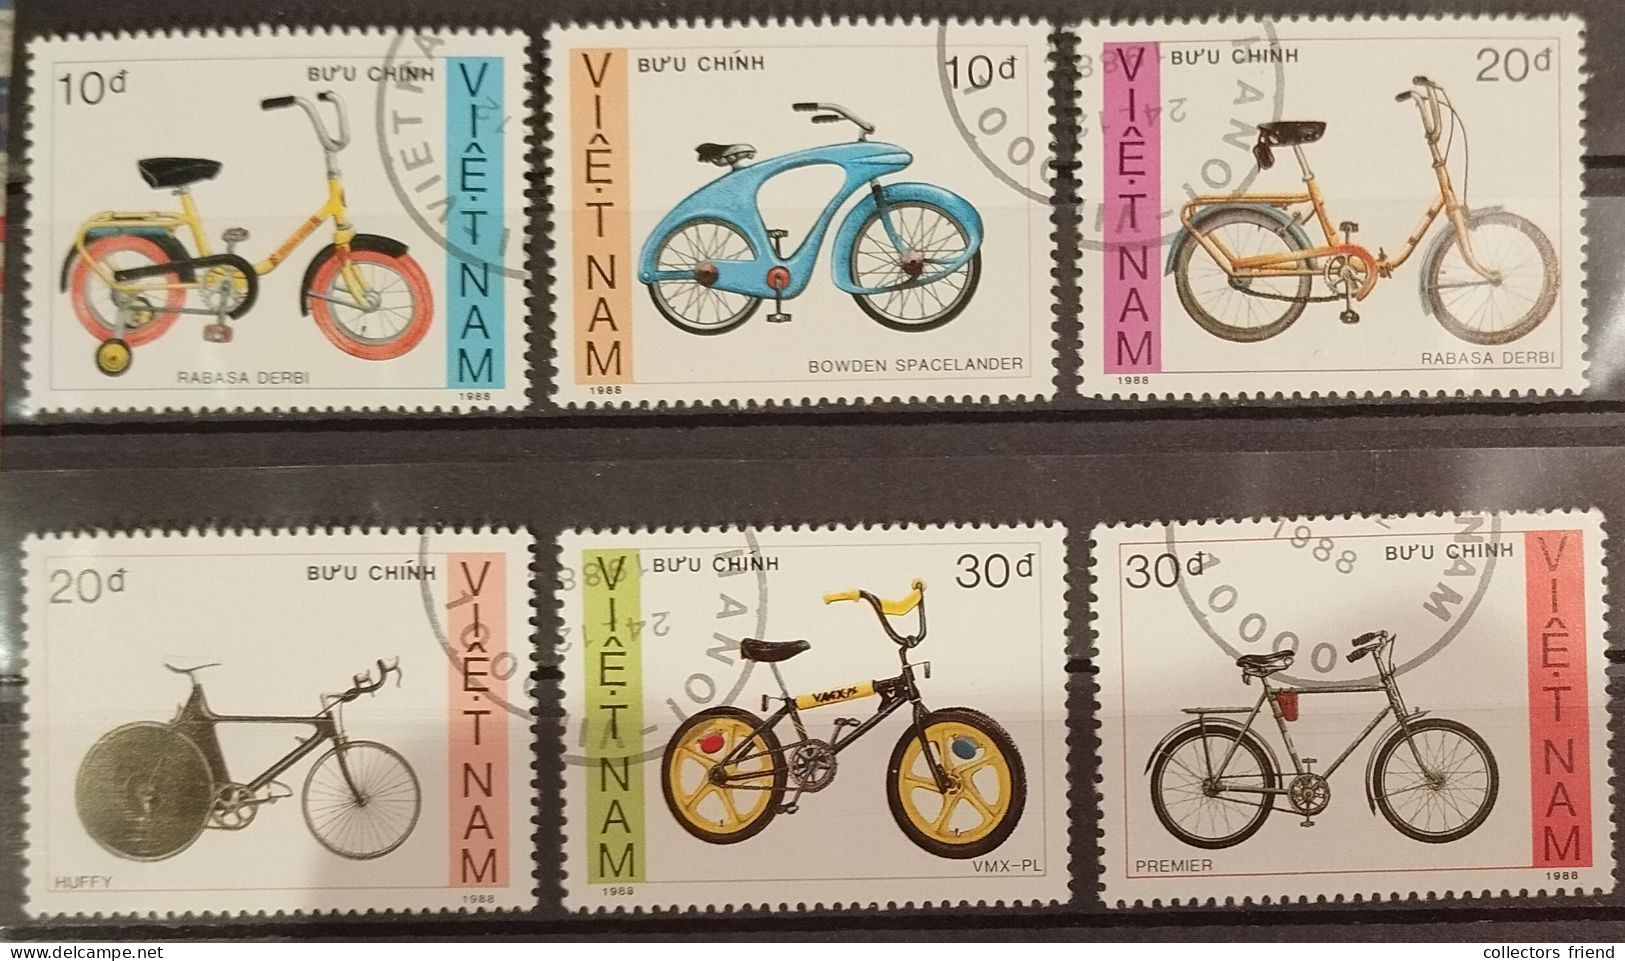 VIETNAM - 1988 - CYCLING BICYCLE - 5 Stamps -  Used - Cycling